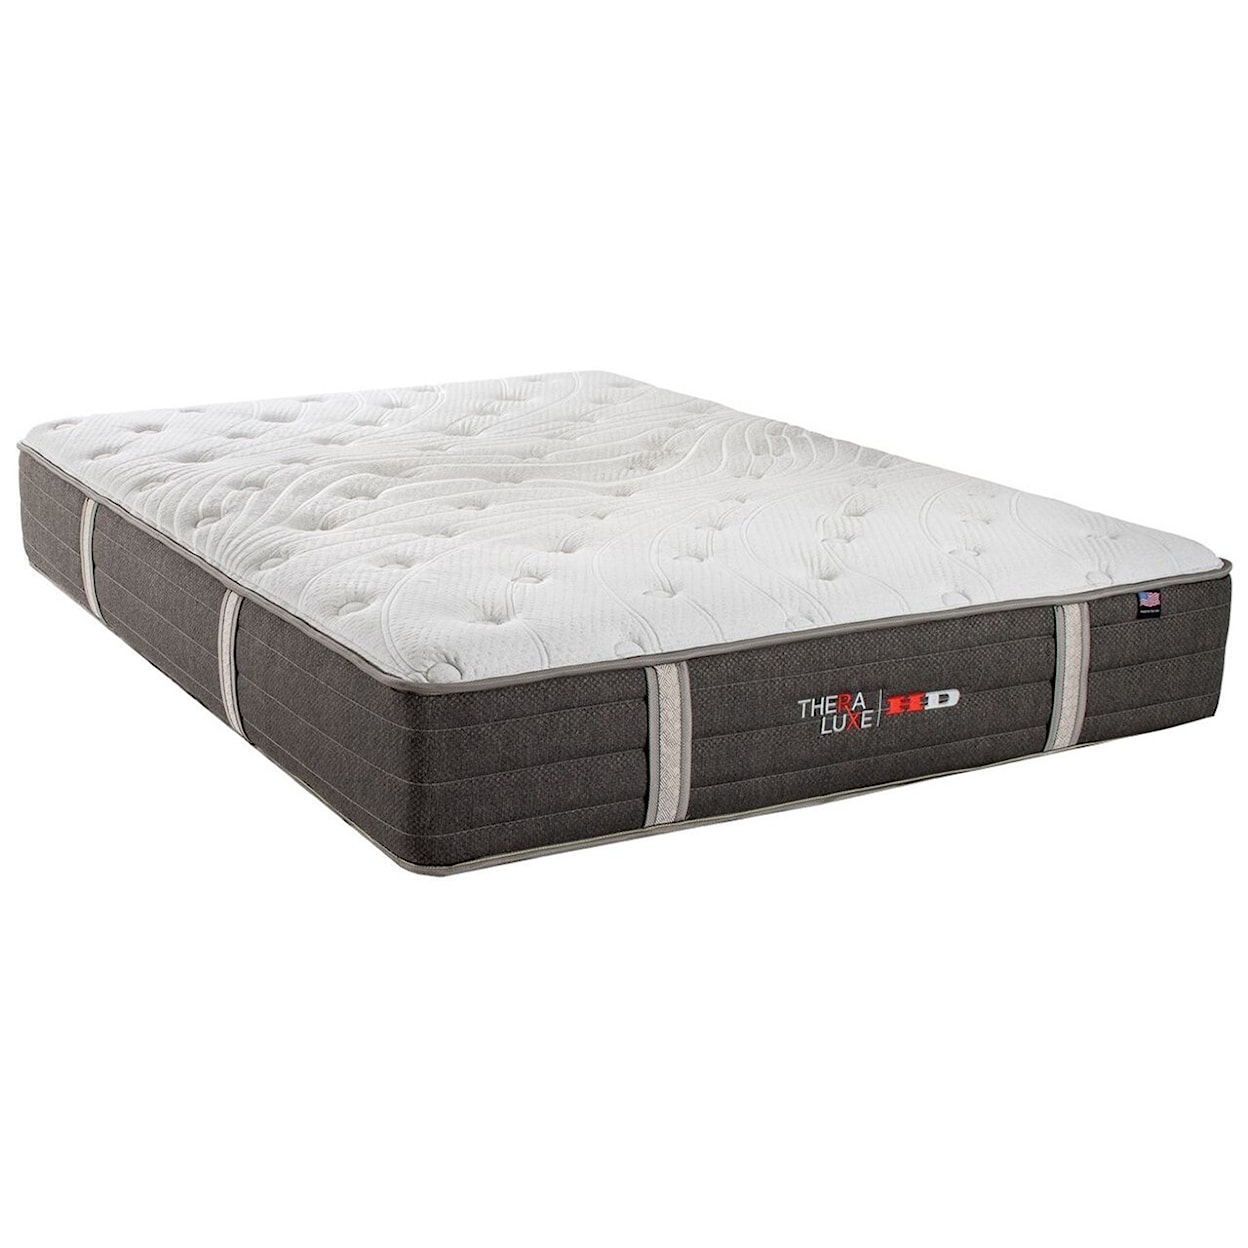 Therapedic Thera Luxe HD Balsam Queen Firm Pocketed Coil Mattress